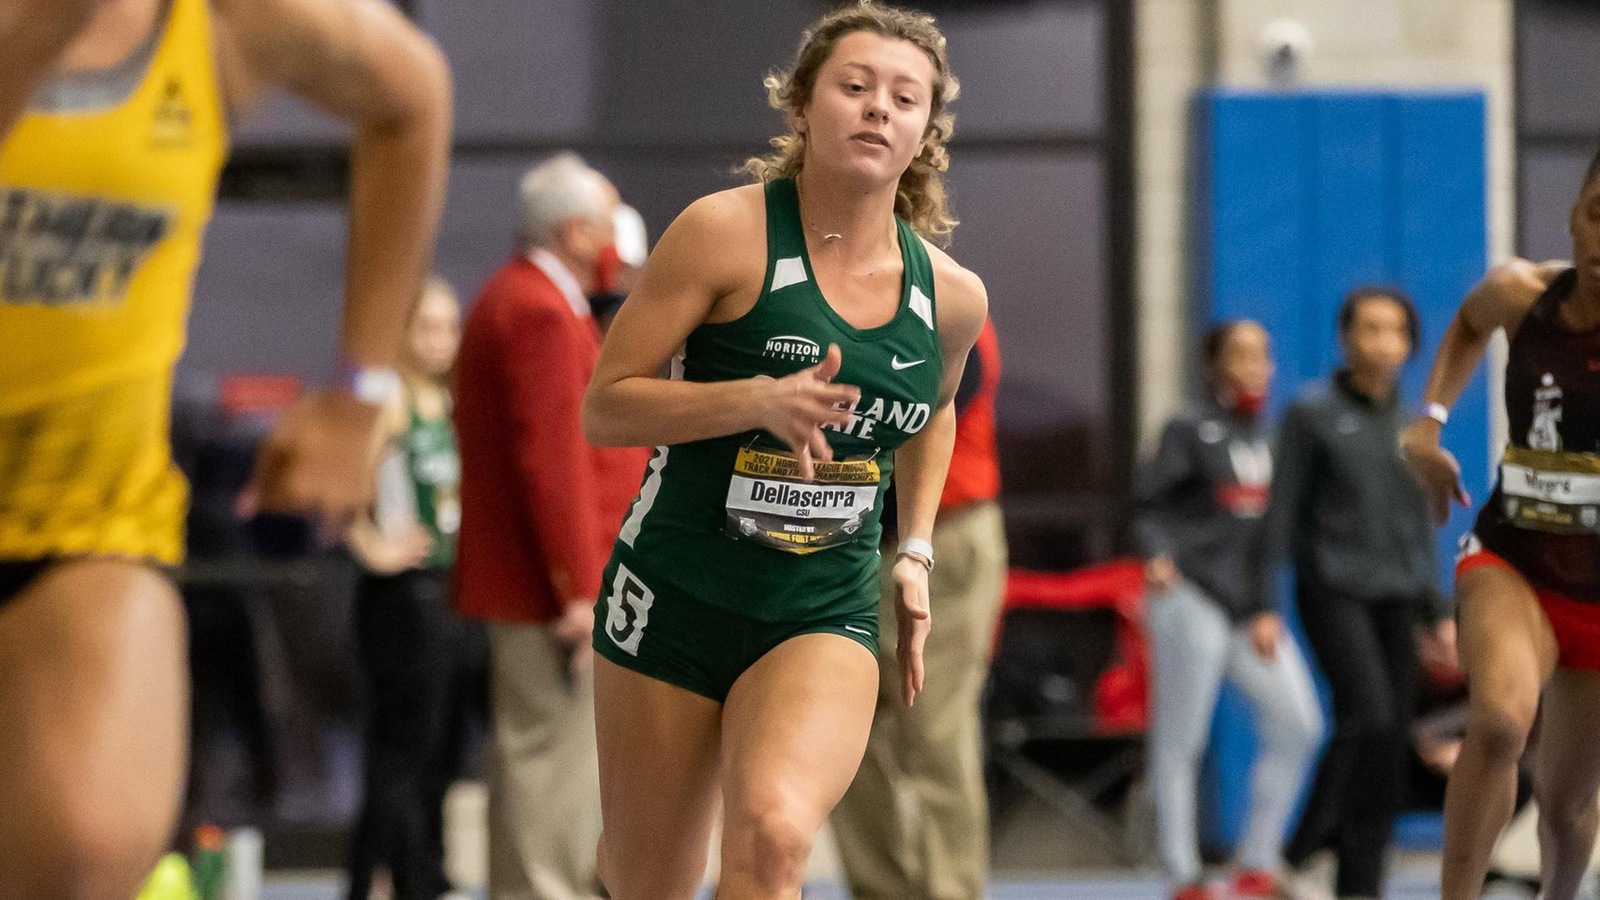 Cleveland State Track & Field Returns To Action At Hillsdale Wide Track Classic